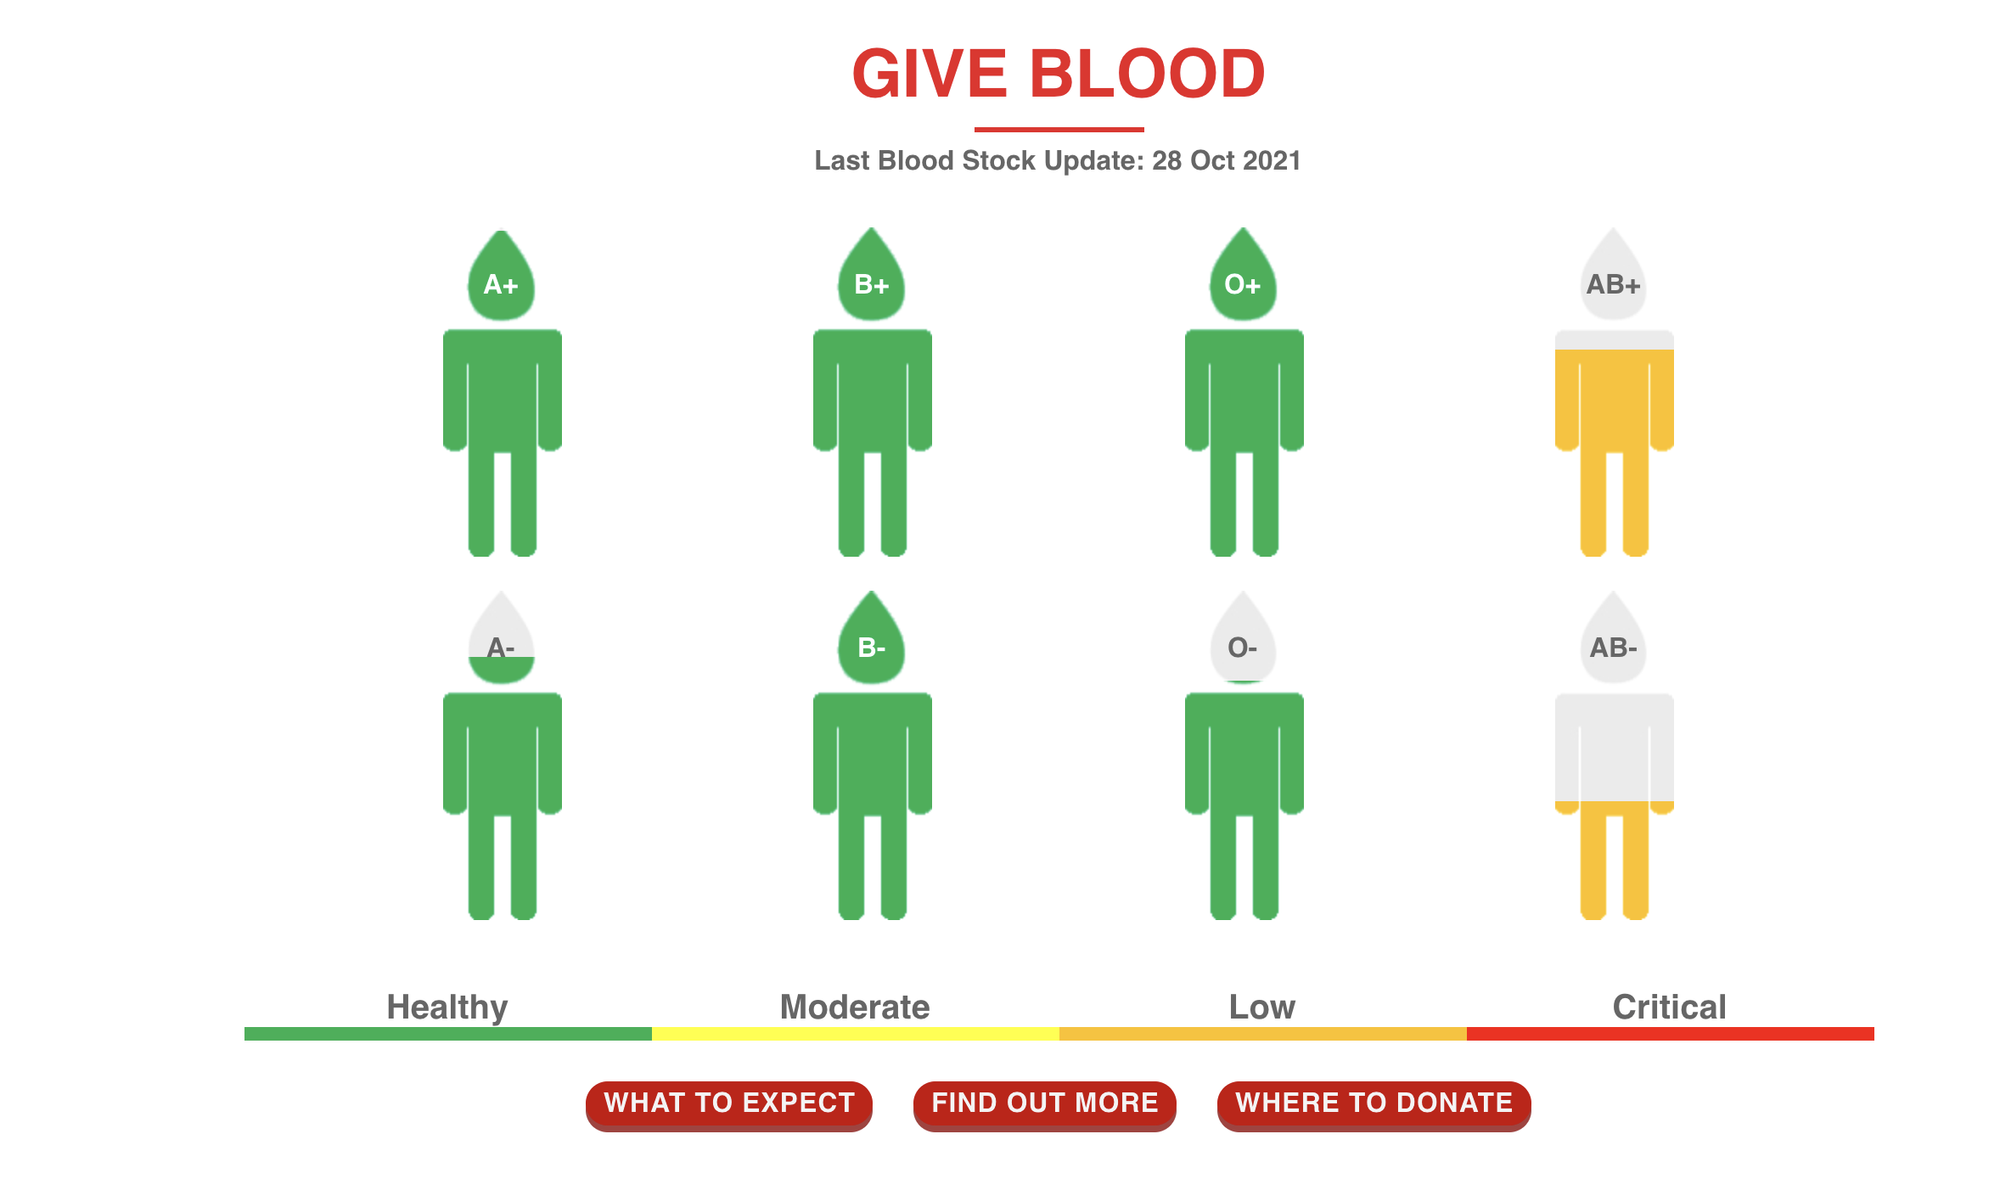 Check https://www.redcross.sg for blood stock level. I only donate when my blood stock level hits "Moderate" or below.